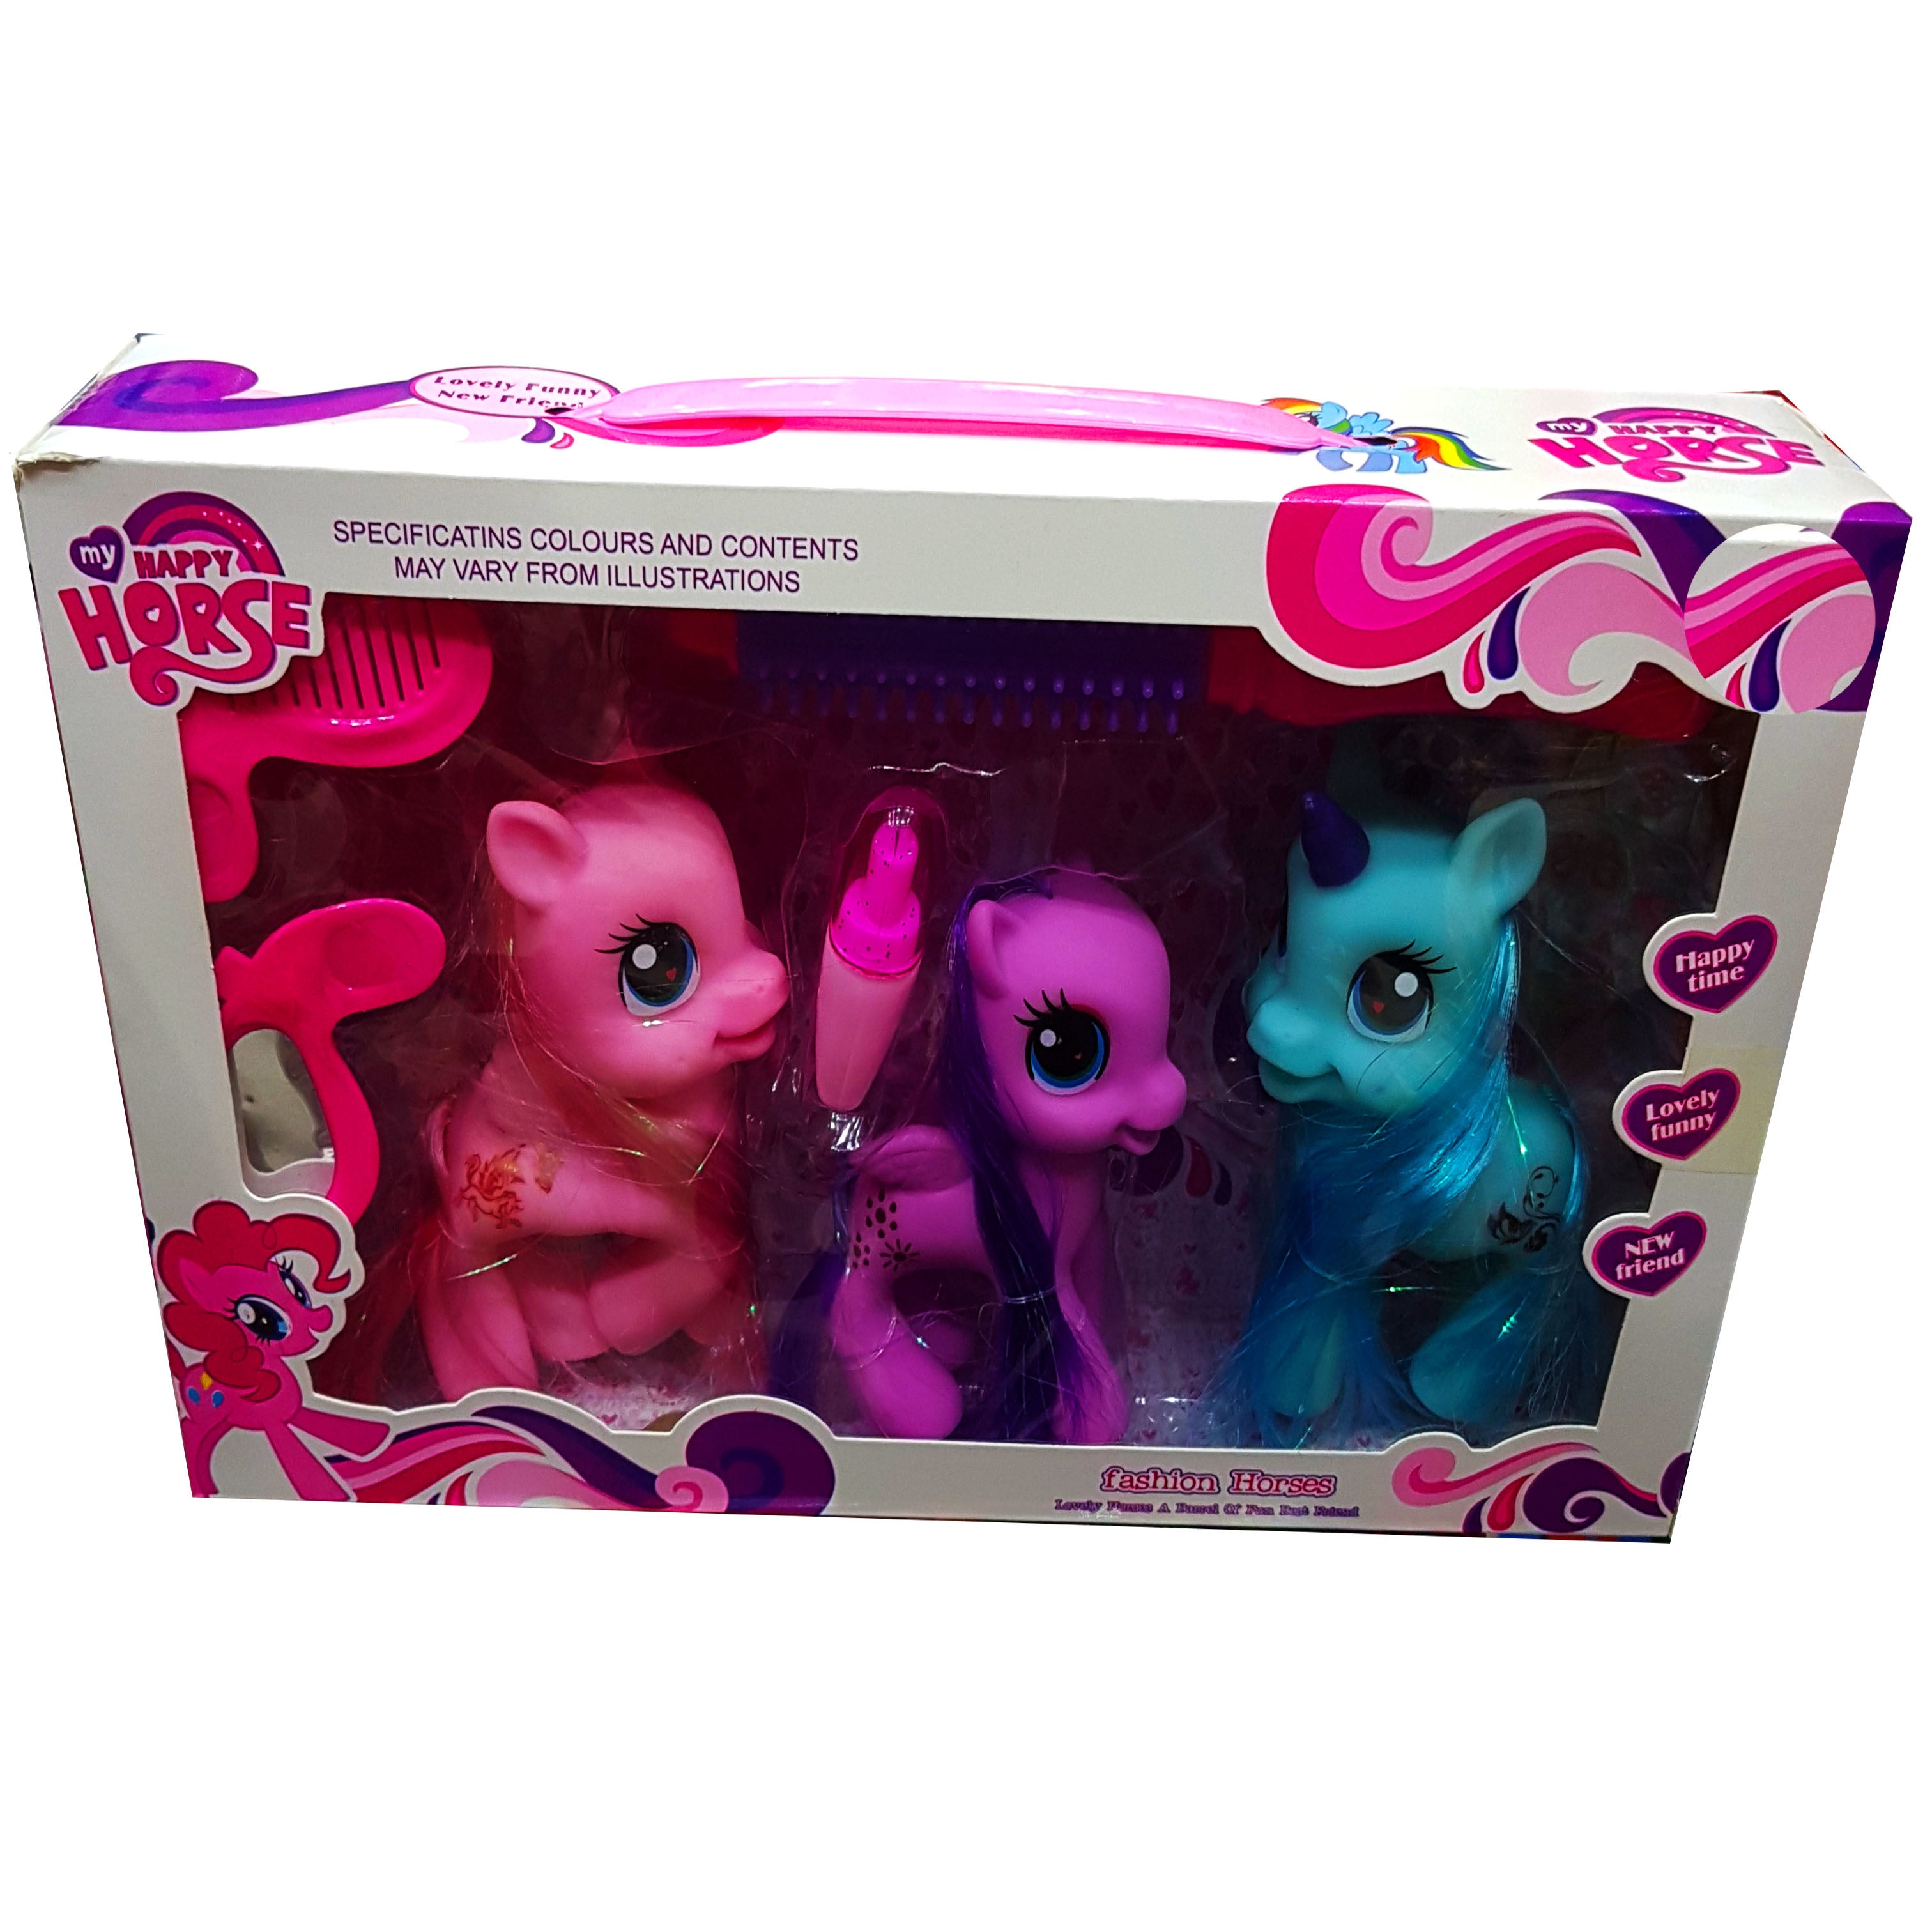 3 Mini Happy Horses Set with Comb & Mirror - My Happy Horse Funny Series - Ideal Gift for Girls Up to 10 Years - New Arrival